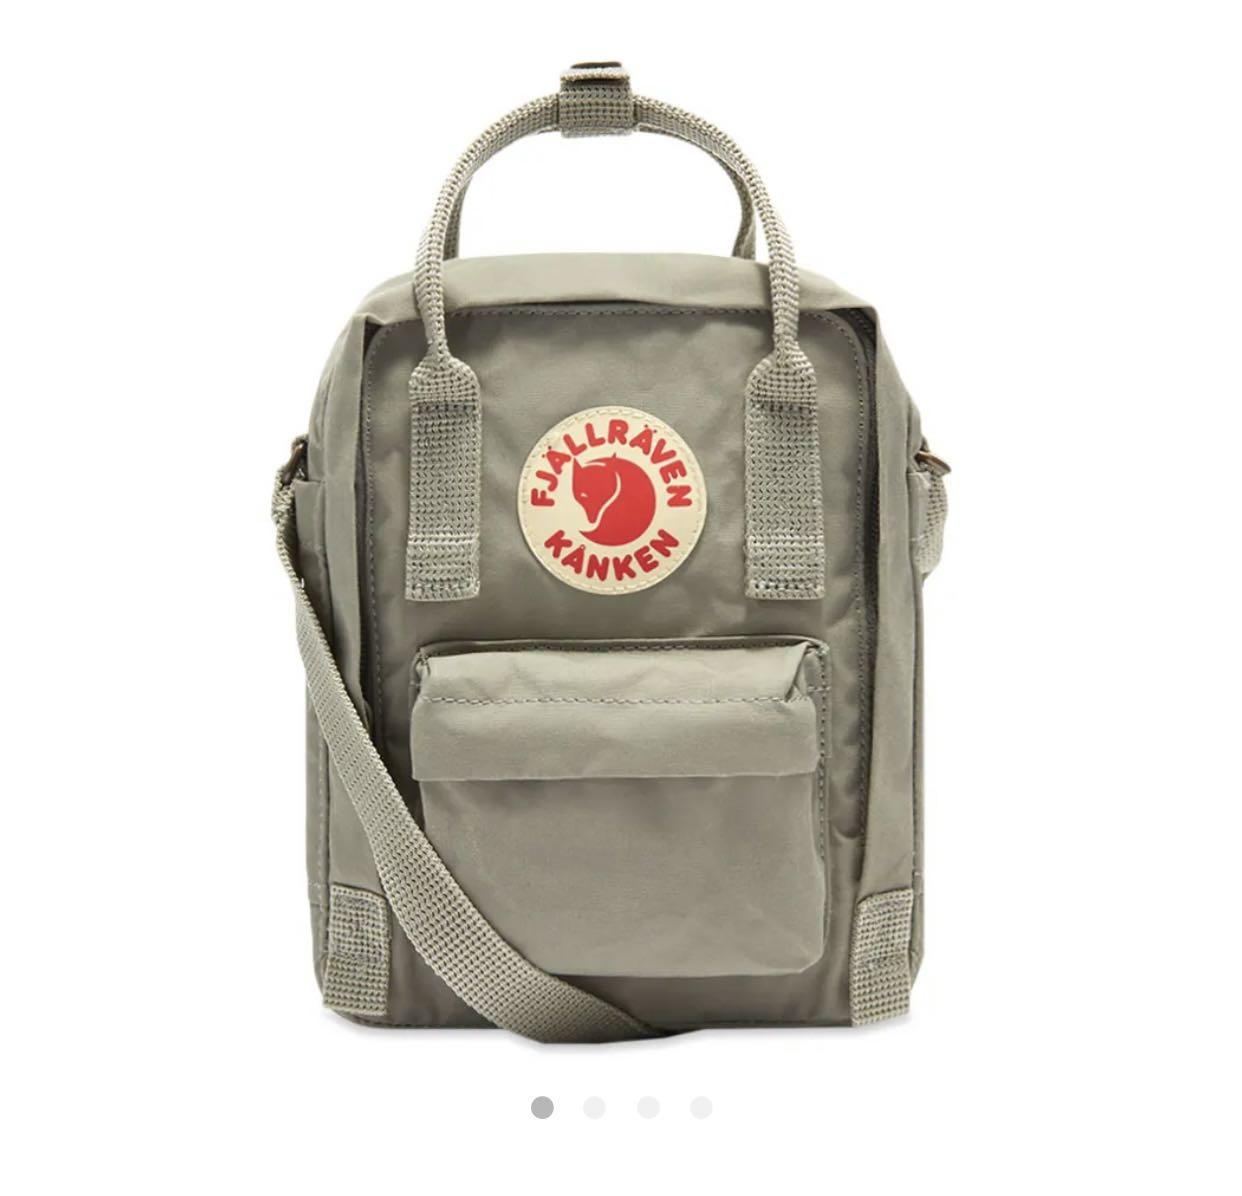 Clearance Relic bag from Kohl's  Bags, Purses, Fjallraven kanken